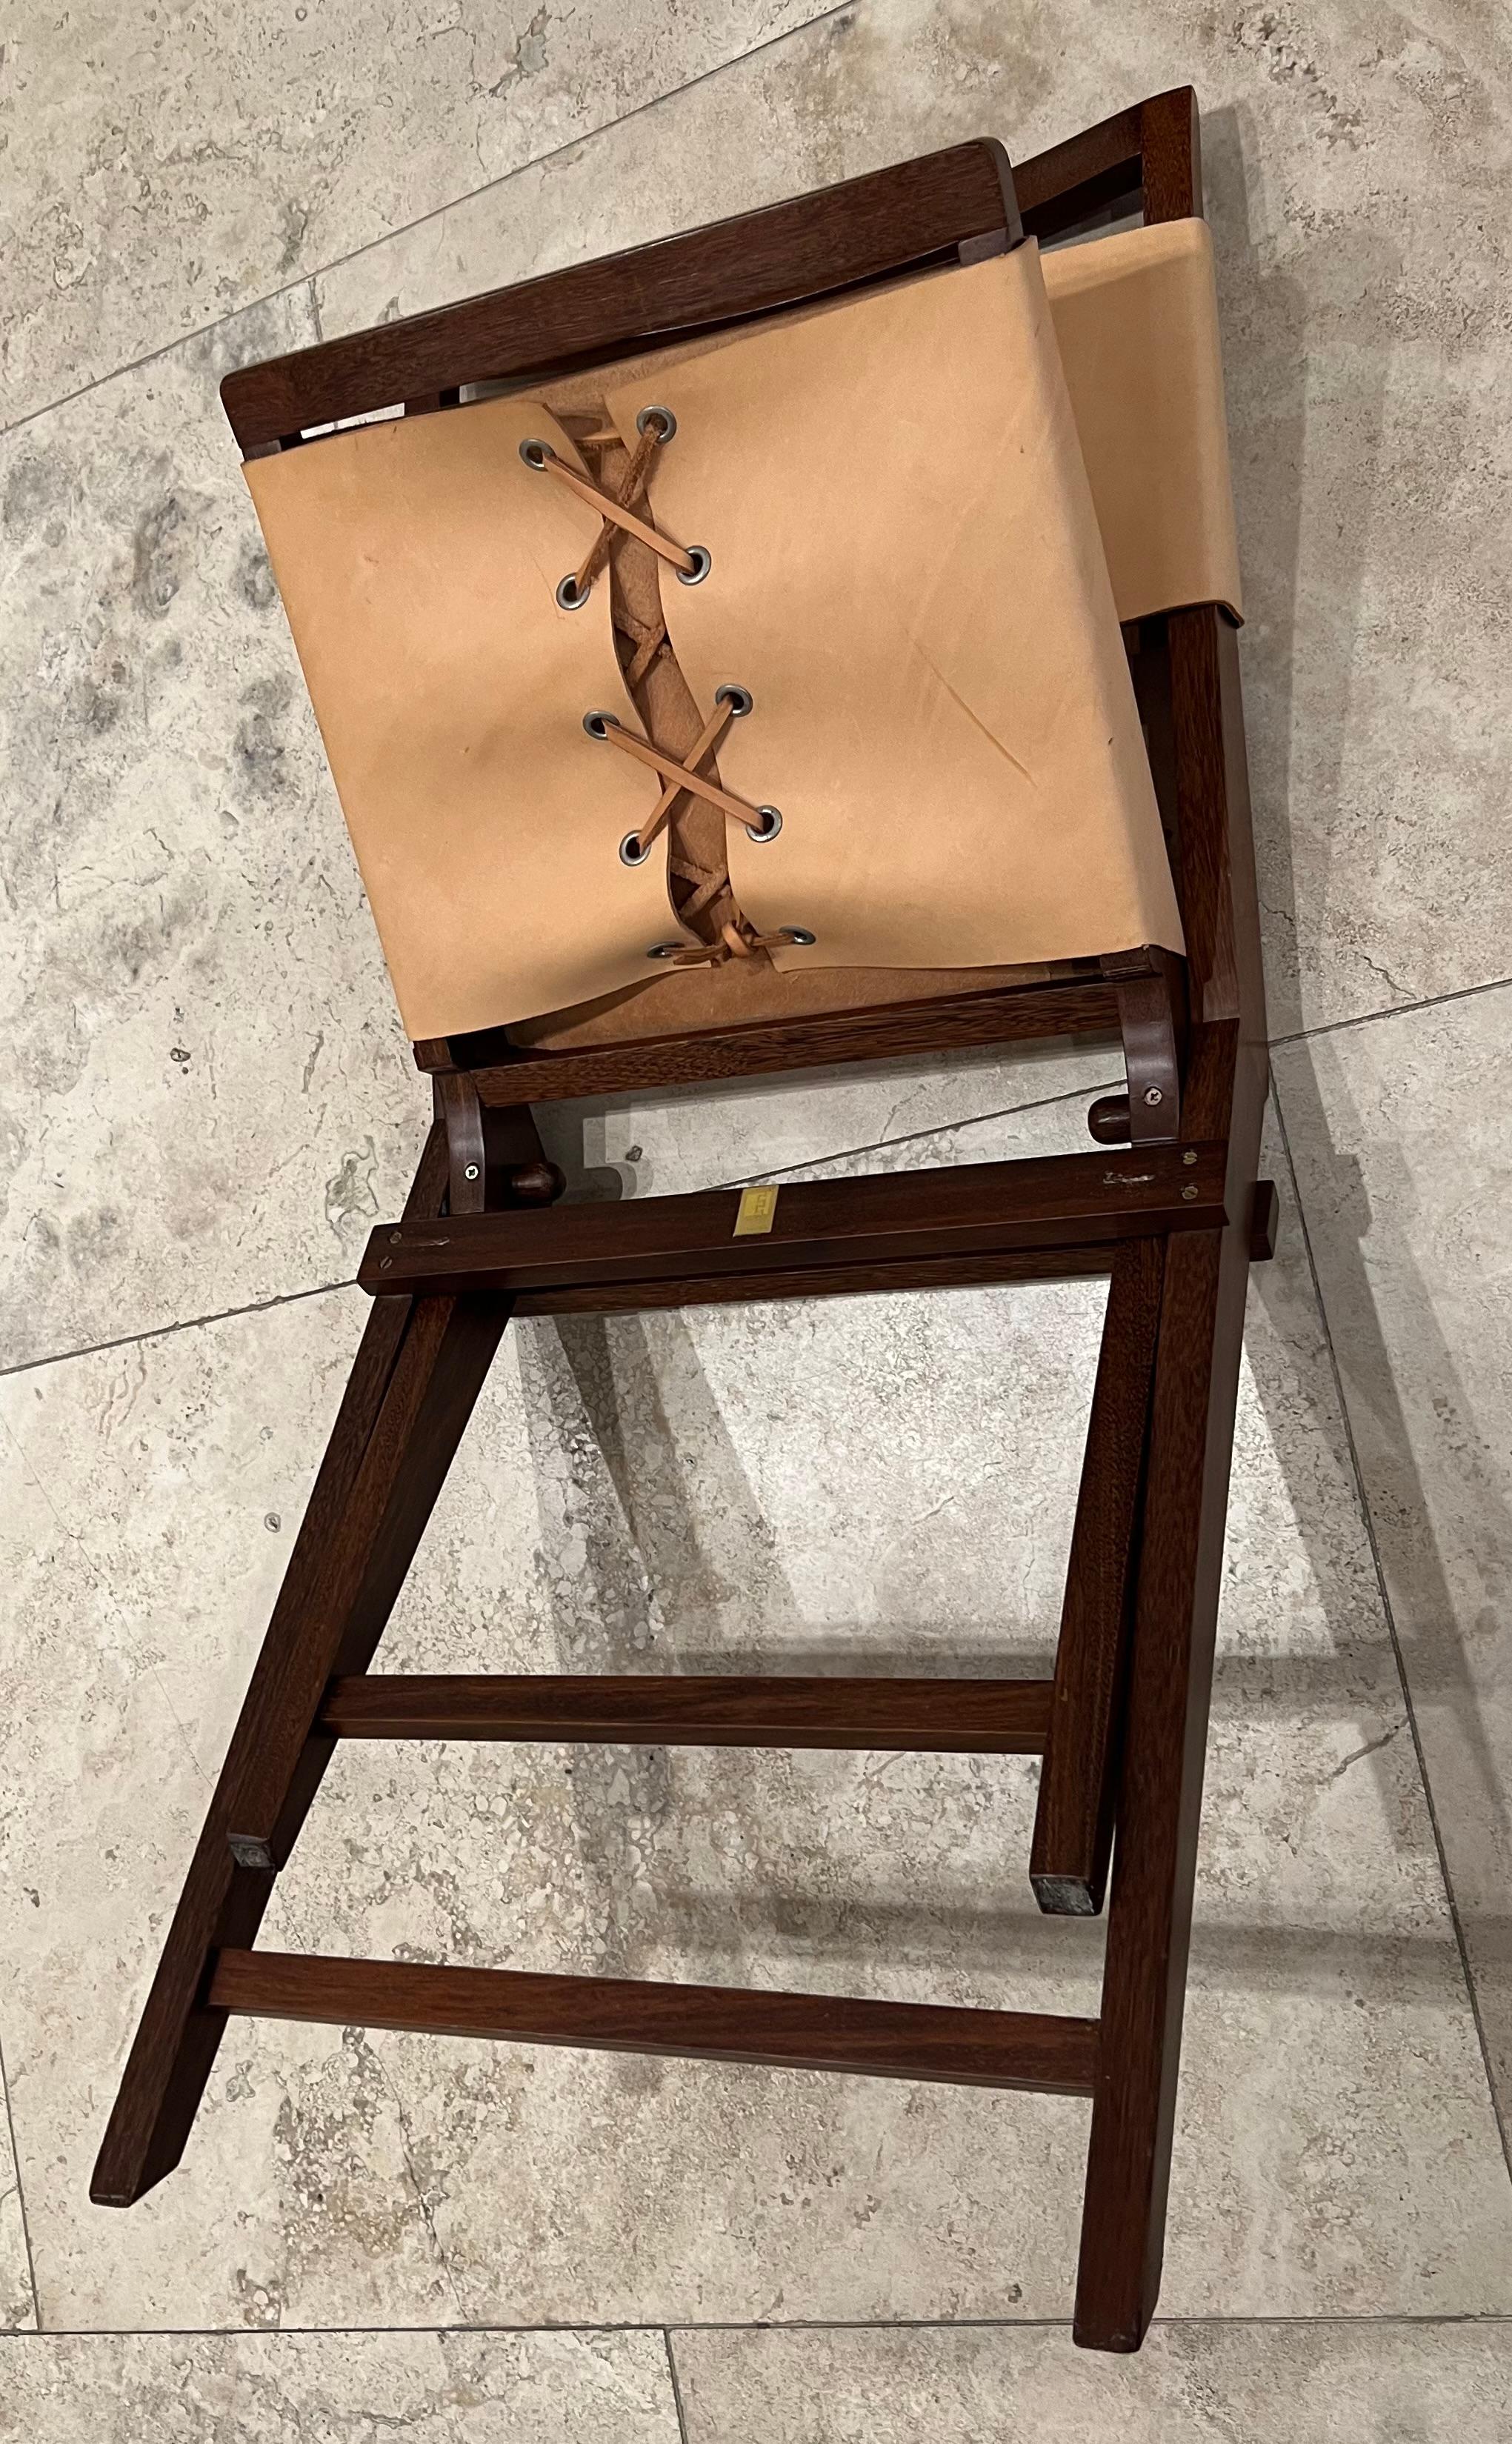 Leather MASP Auditorium Chair by Lina Bo Bardi For Sale